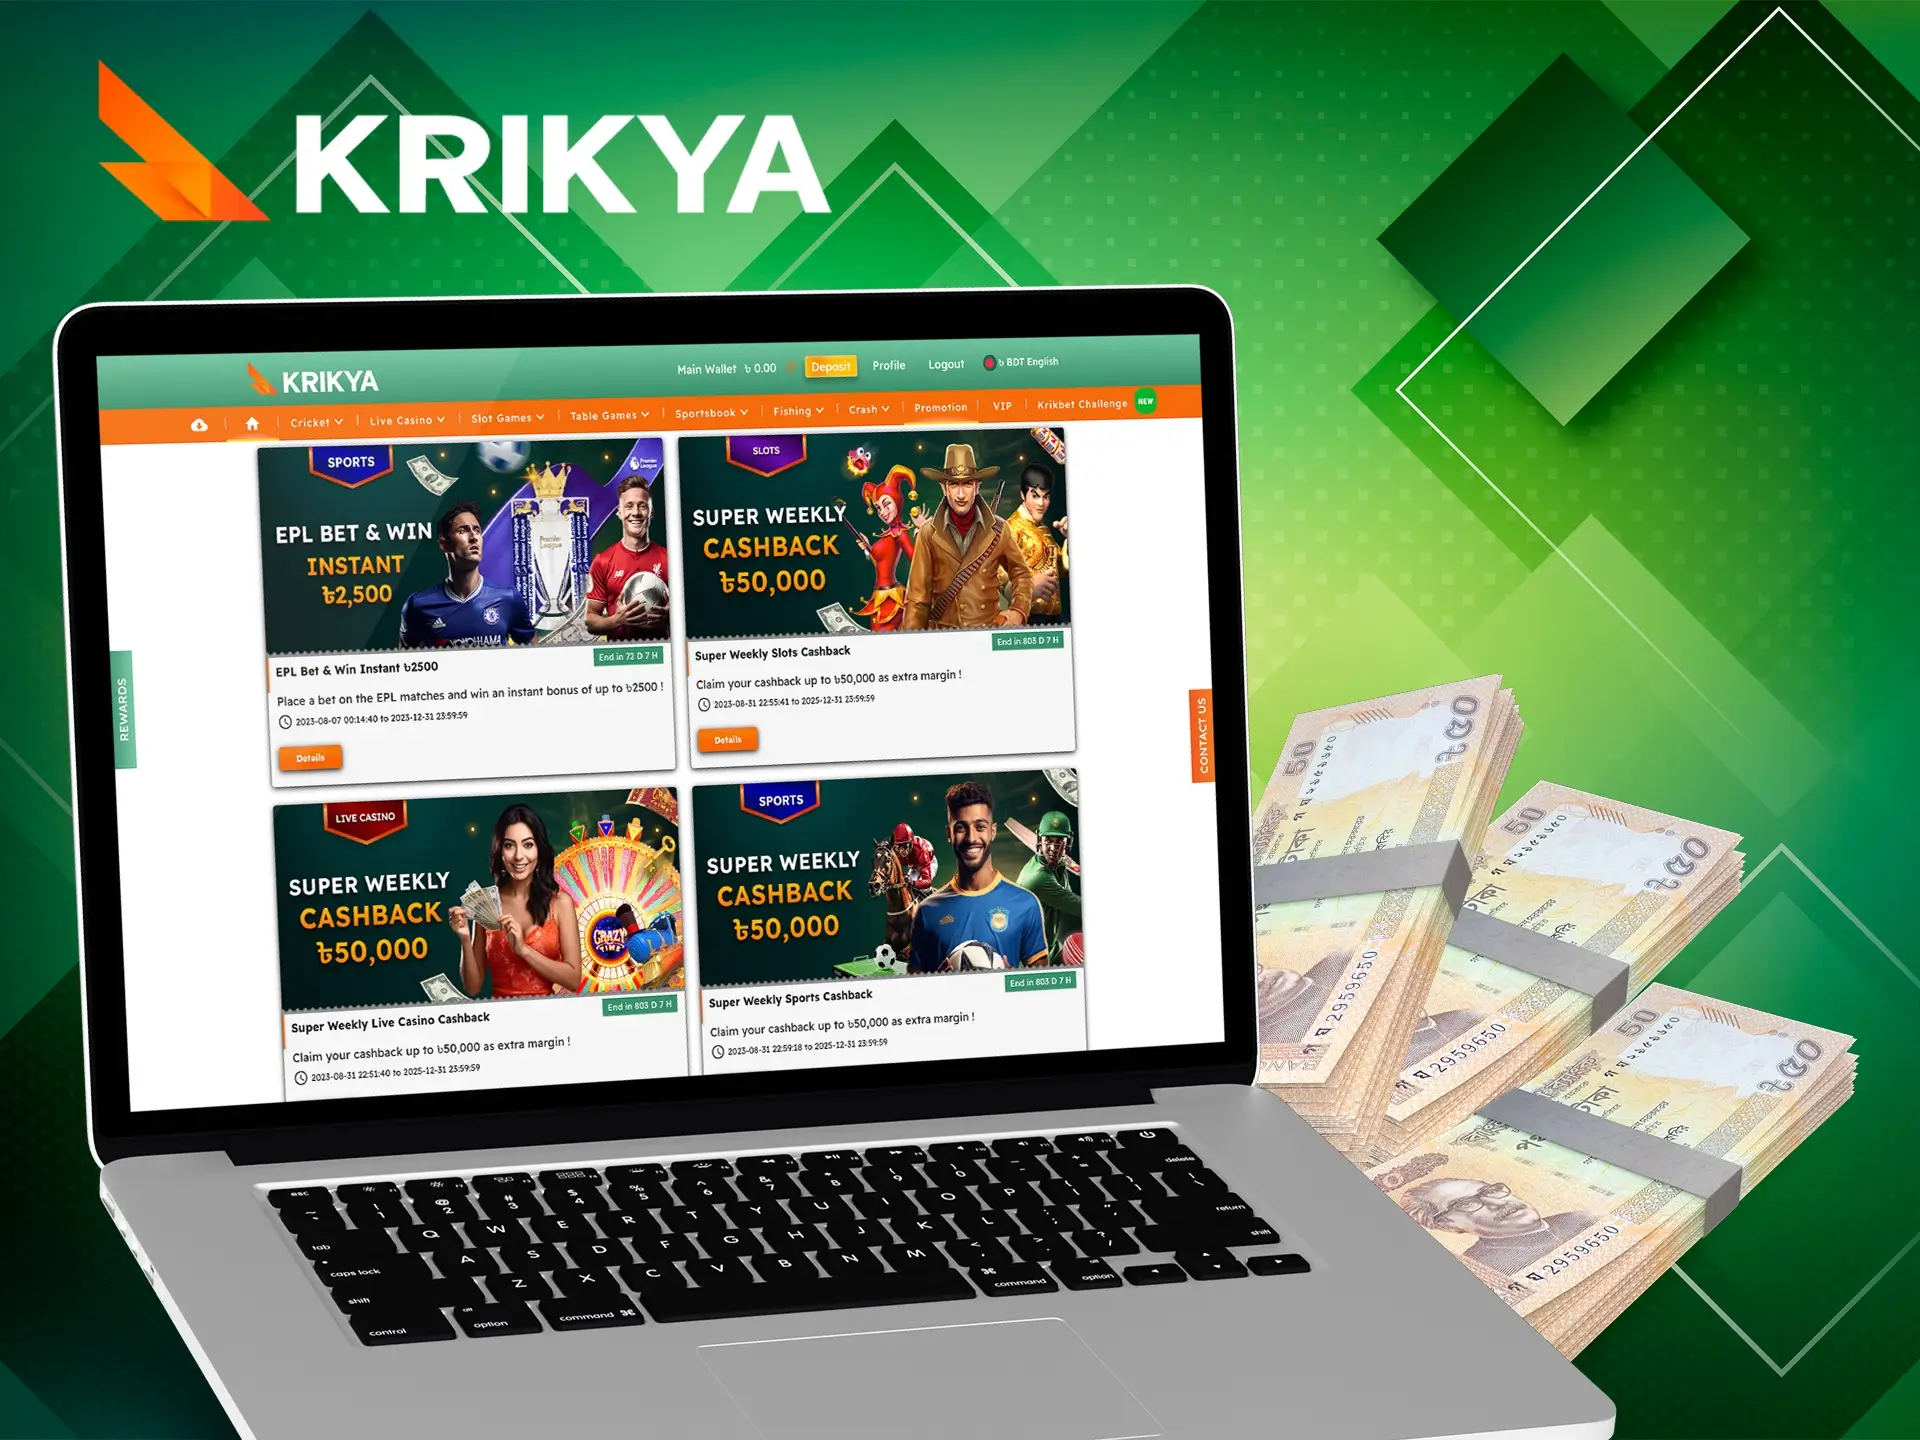 Open the promotions section and you'll be delighted to see such a wide range of gifts from Krikya.